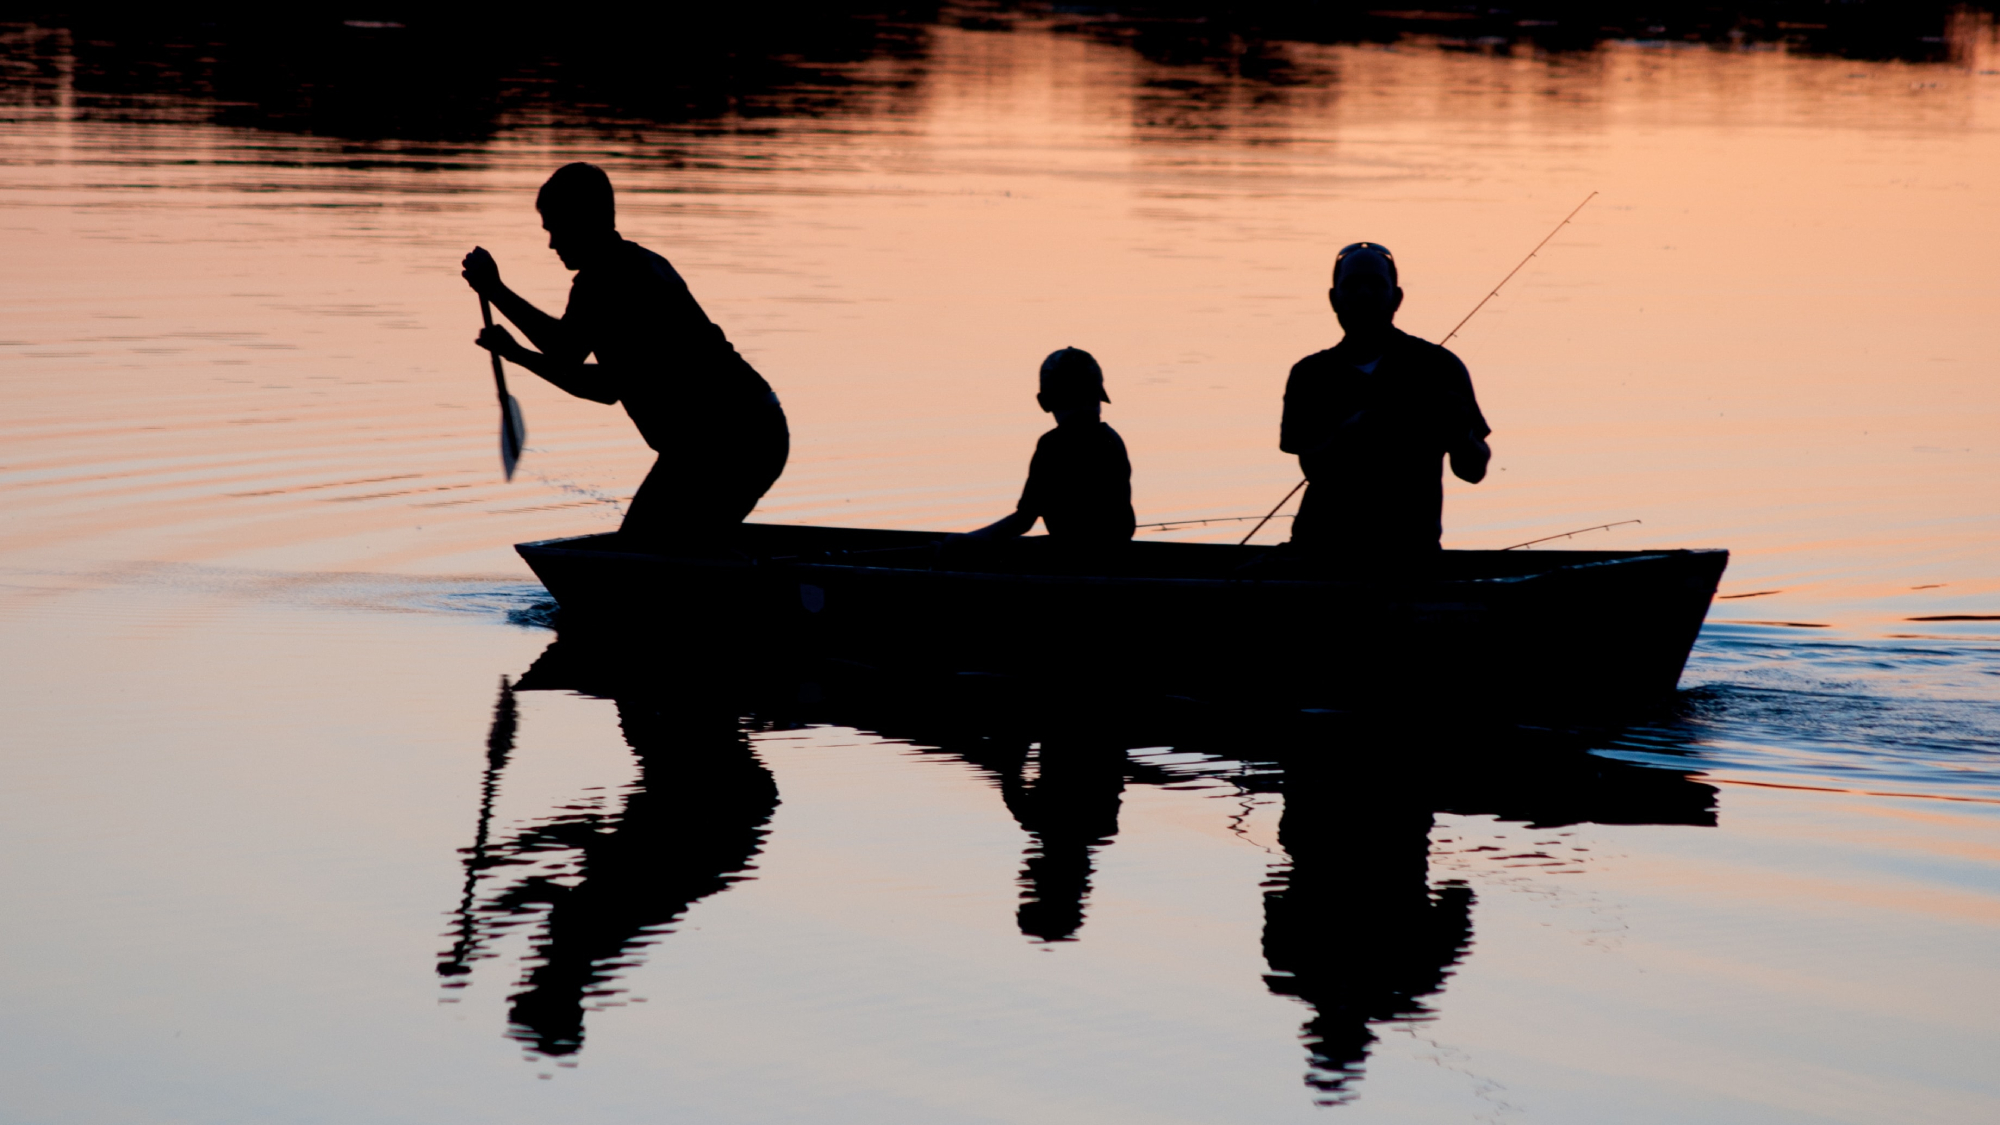 How to take your kids on their first fishing trip | Popular Science